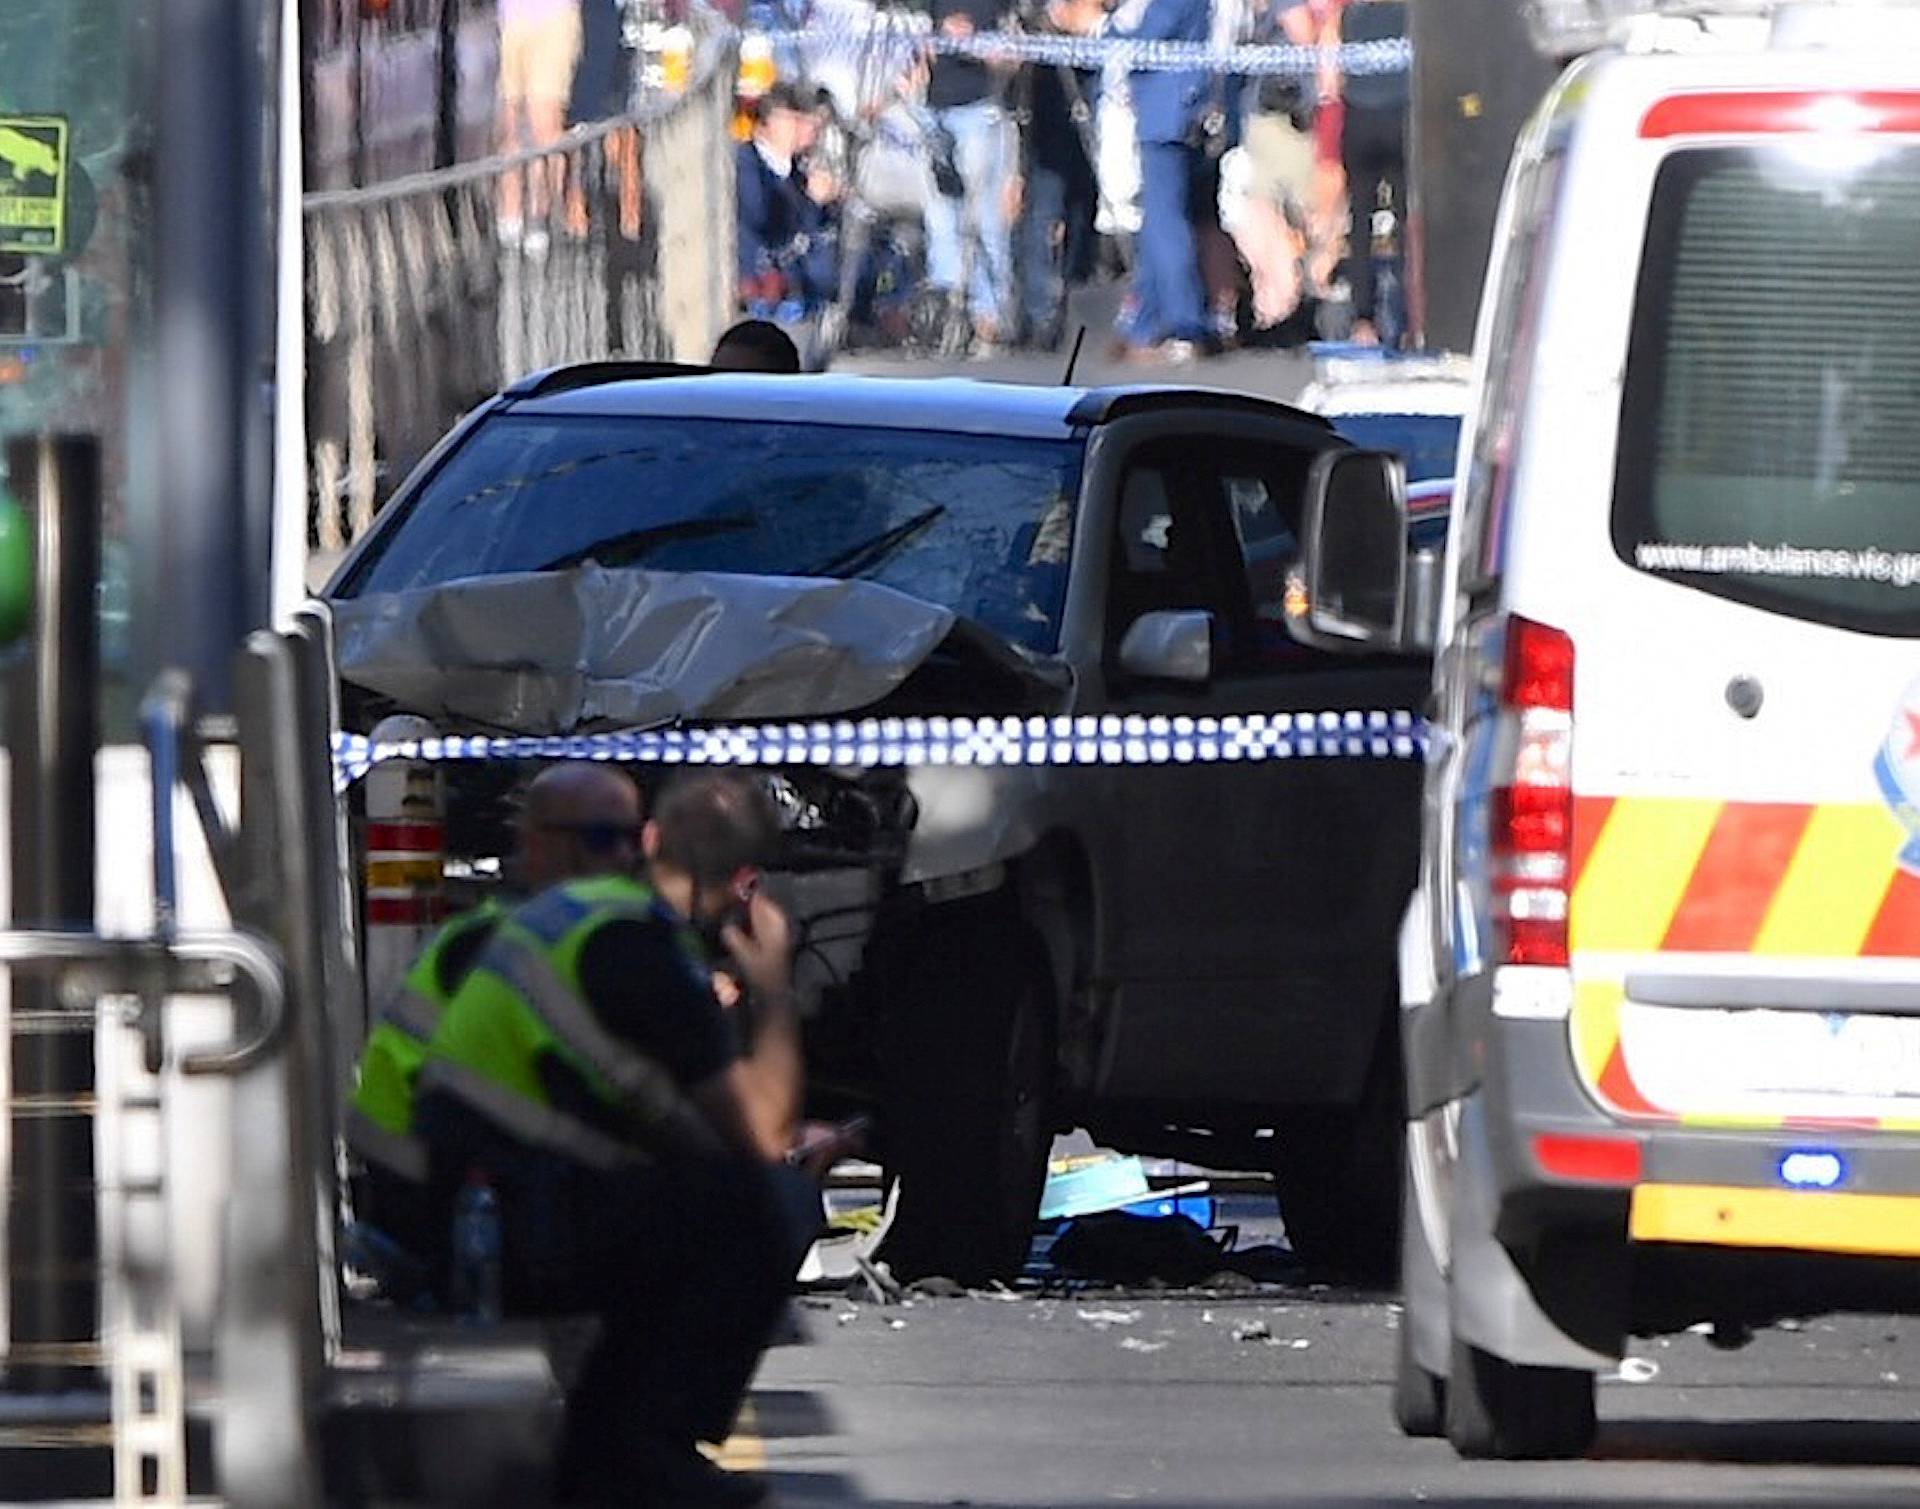 Police sit in front of a crashed vehicle after a driver was arrested after ploughing into pedestrians at a crowded intersection near the Flinders Street train station in central Melbourne